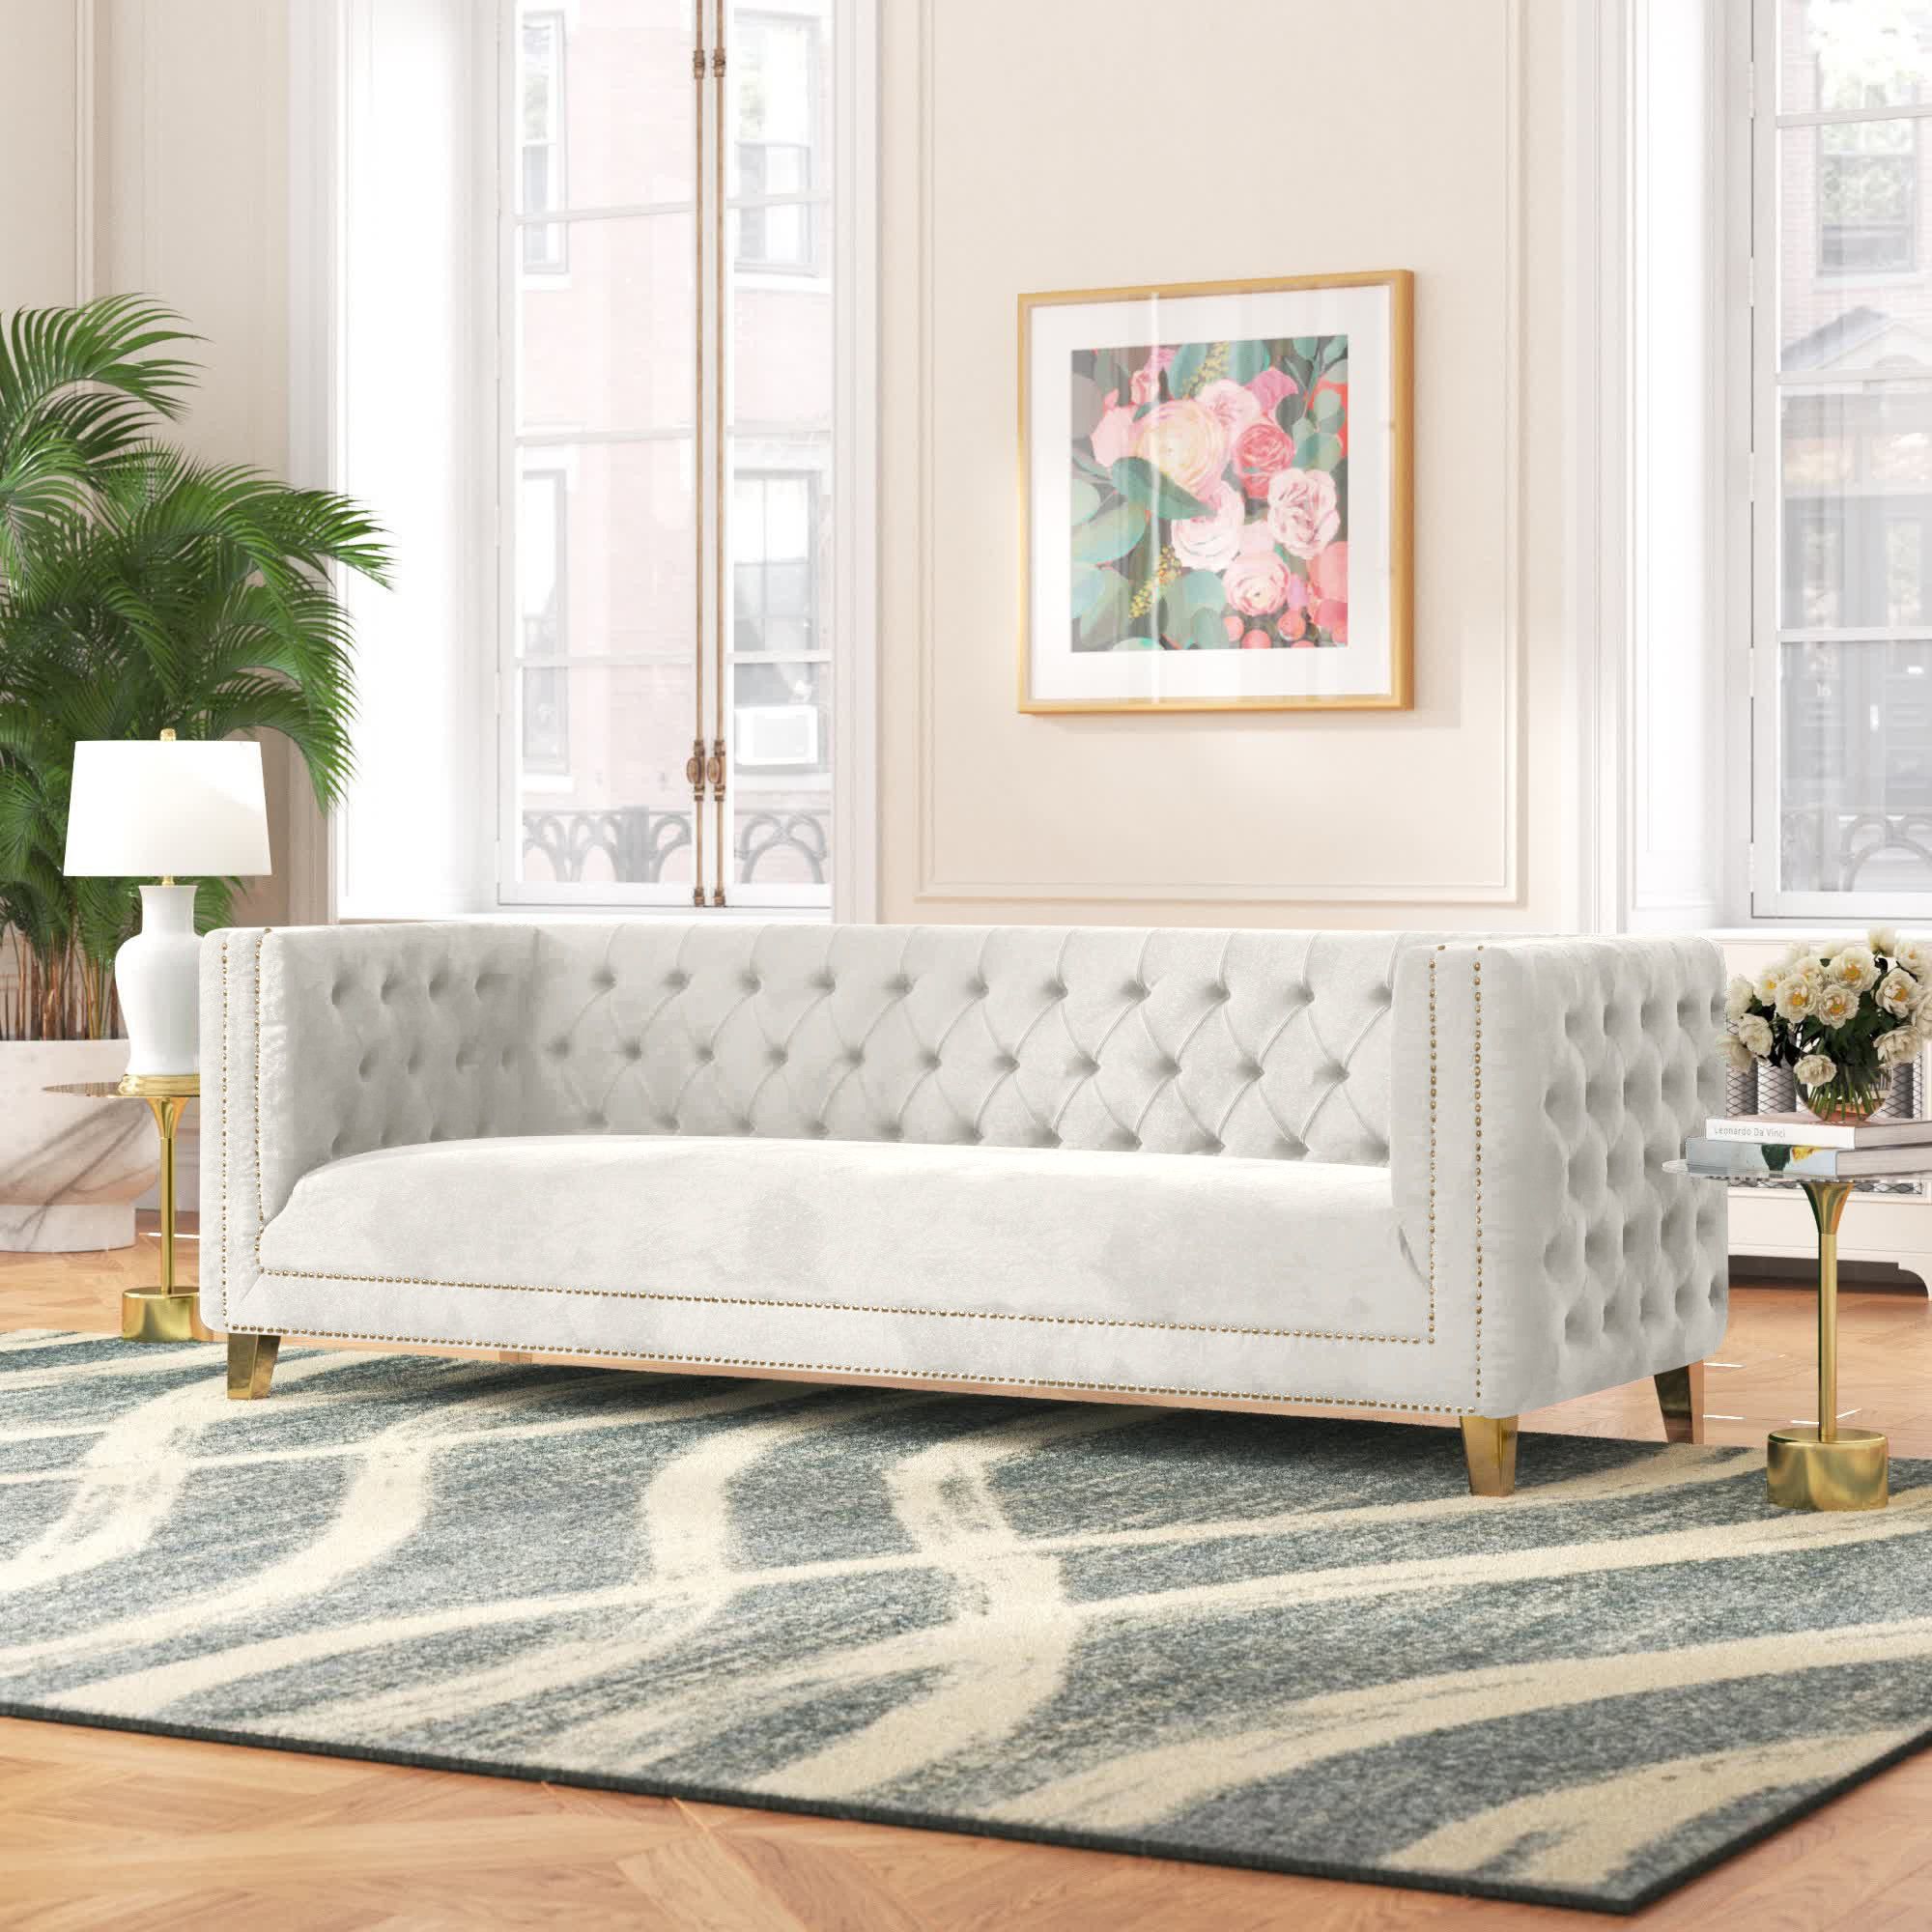 Willa Arlo Interiors Sickels 90'' Upholstered Sofa & Reviews | Wayfair Throughout Tufted Upholstered Sofas (Photo 4 of 15)